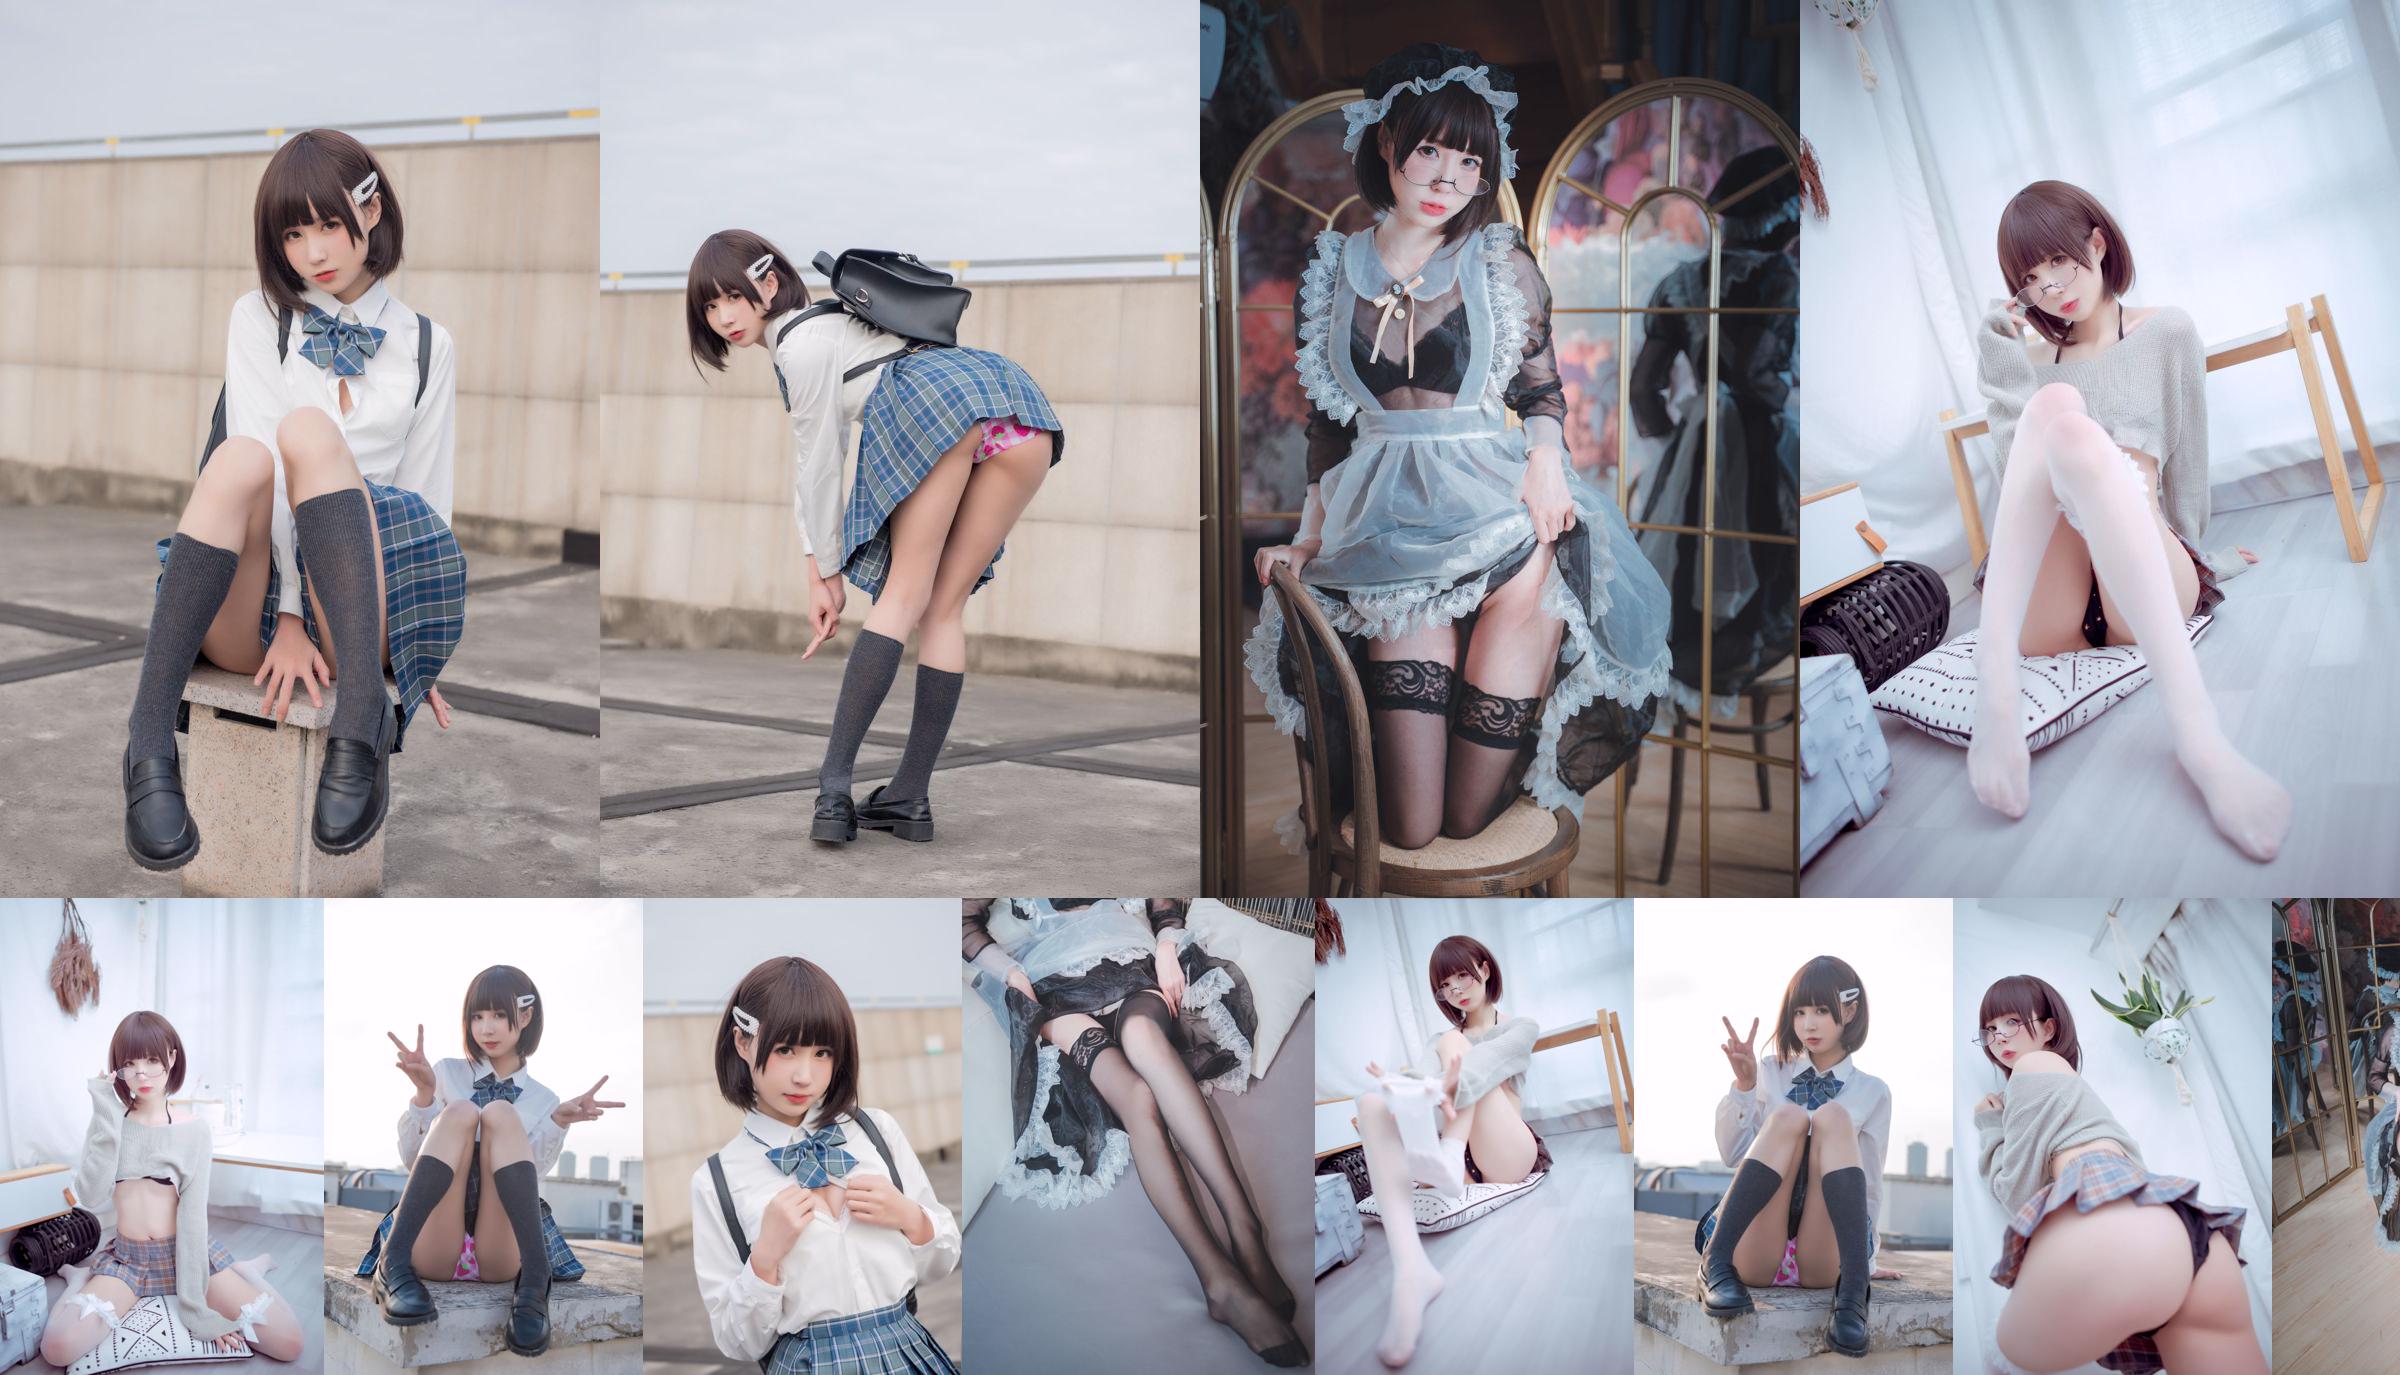 [Beauty Coser] Southern Pigeon "Private House" No.5eb823 Page 1